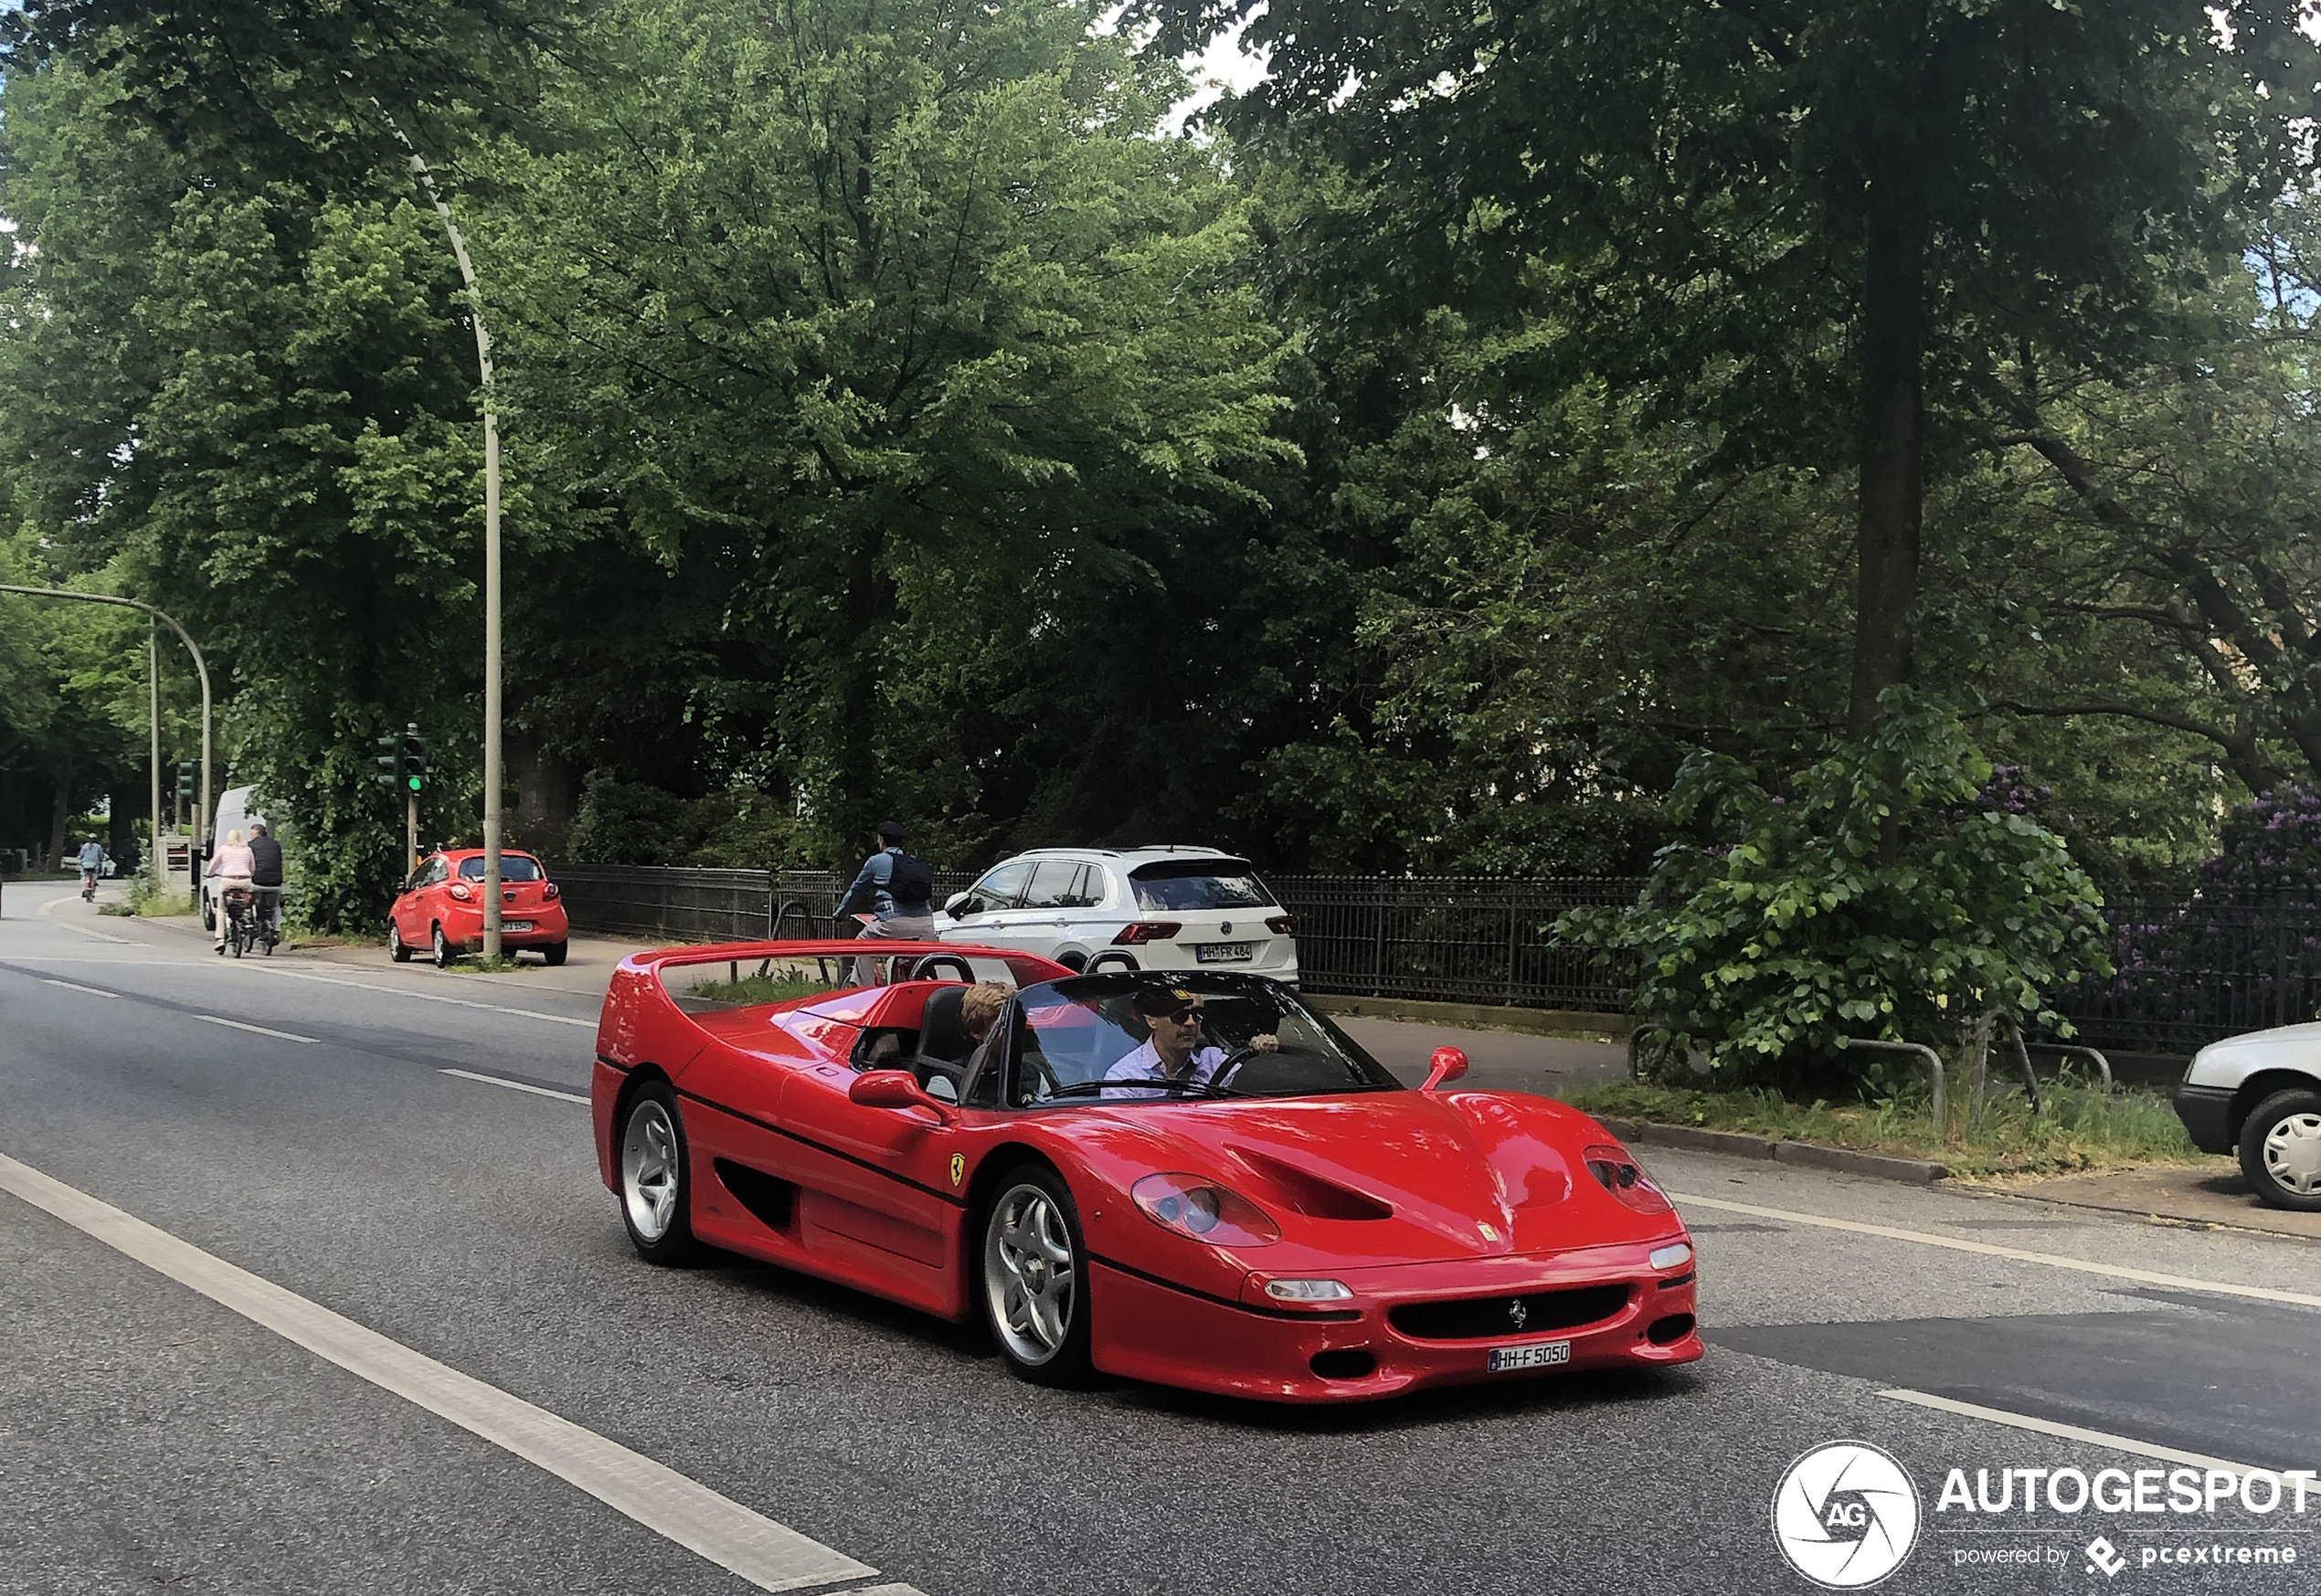 This Ferrari F50 is still in the same hands